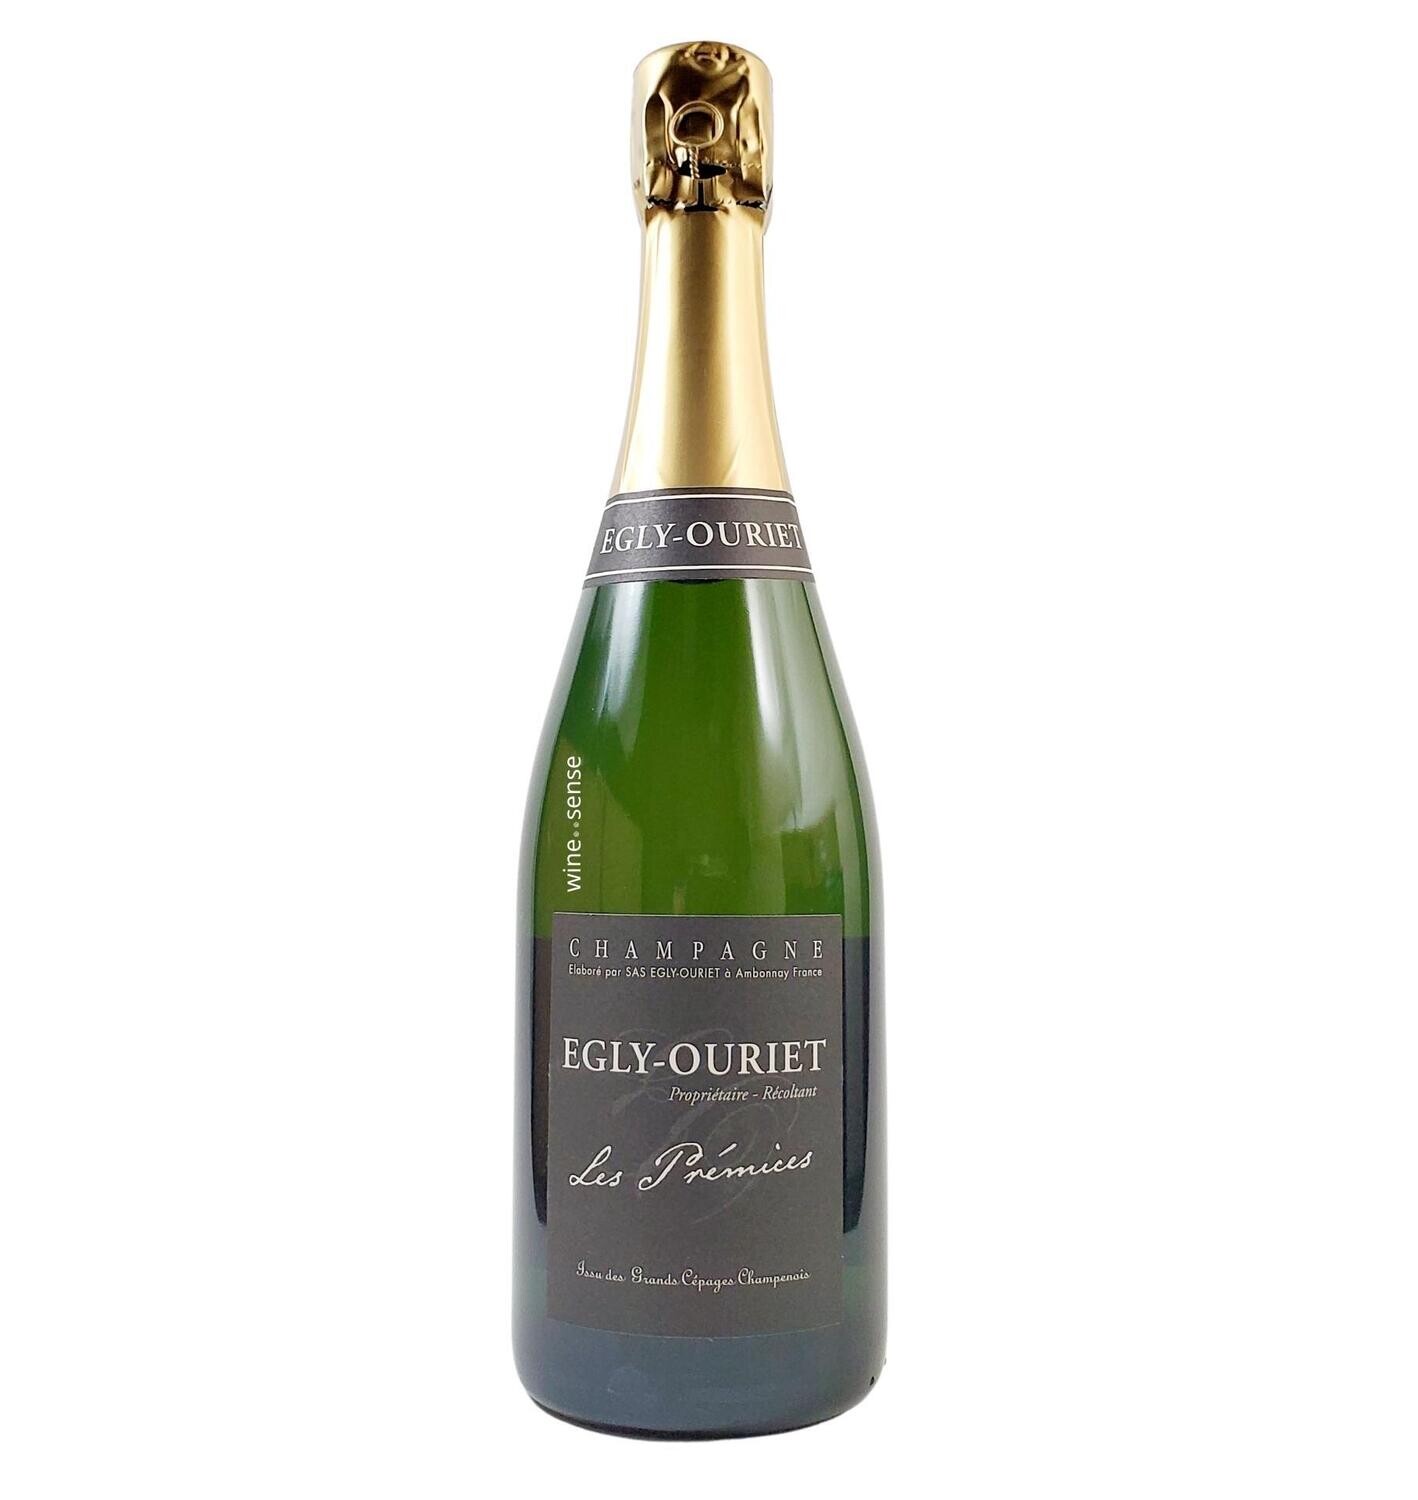 Egly-Ouriet, Champagne Brut Les Premices (NV)